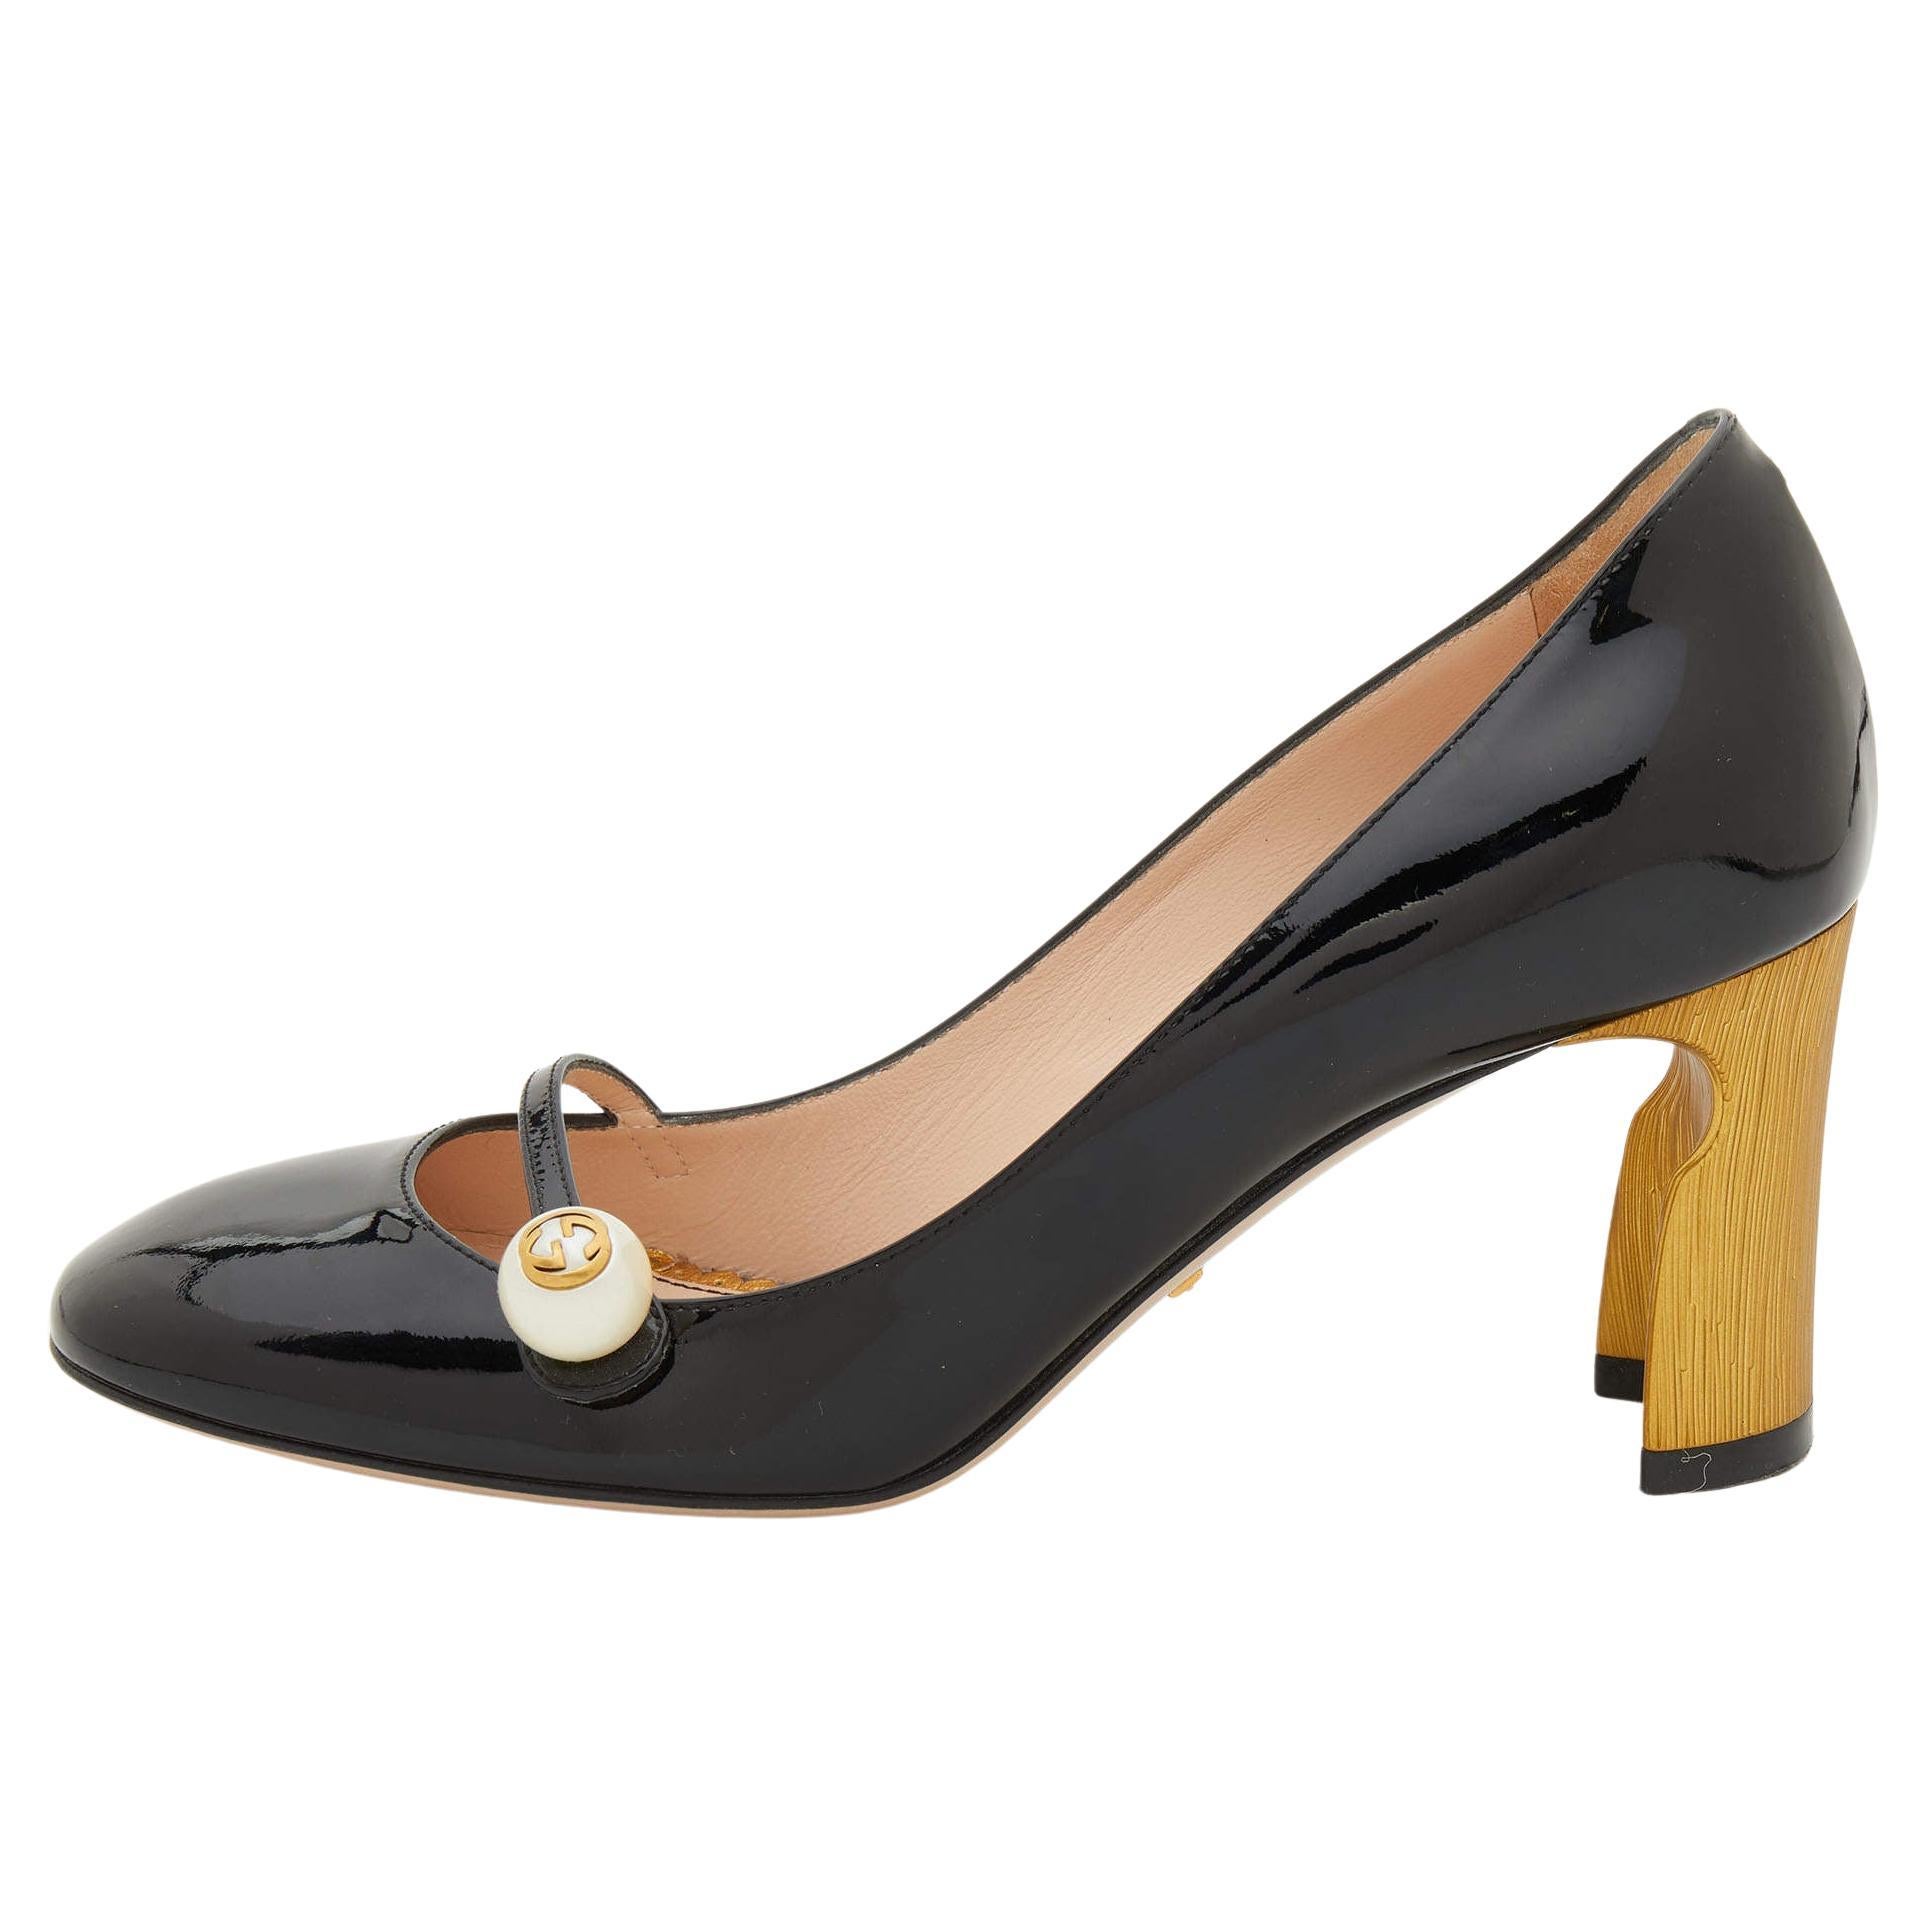 Gucci Black Patent Leather Vernice Pearl Arielle Mary Jane Pumps Size ...